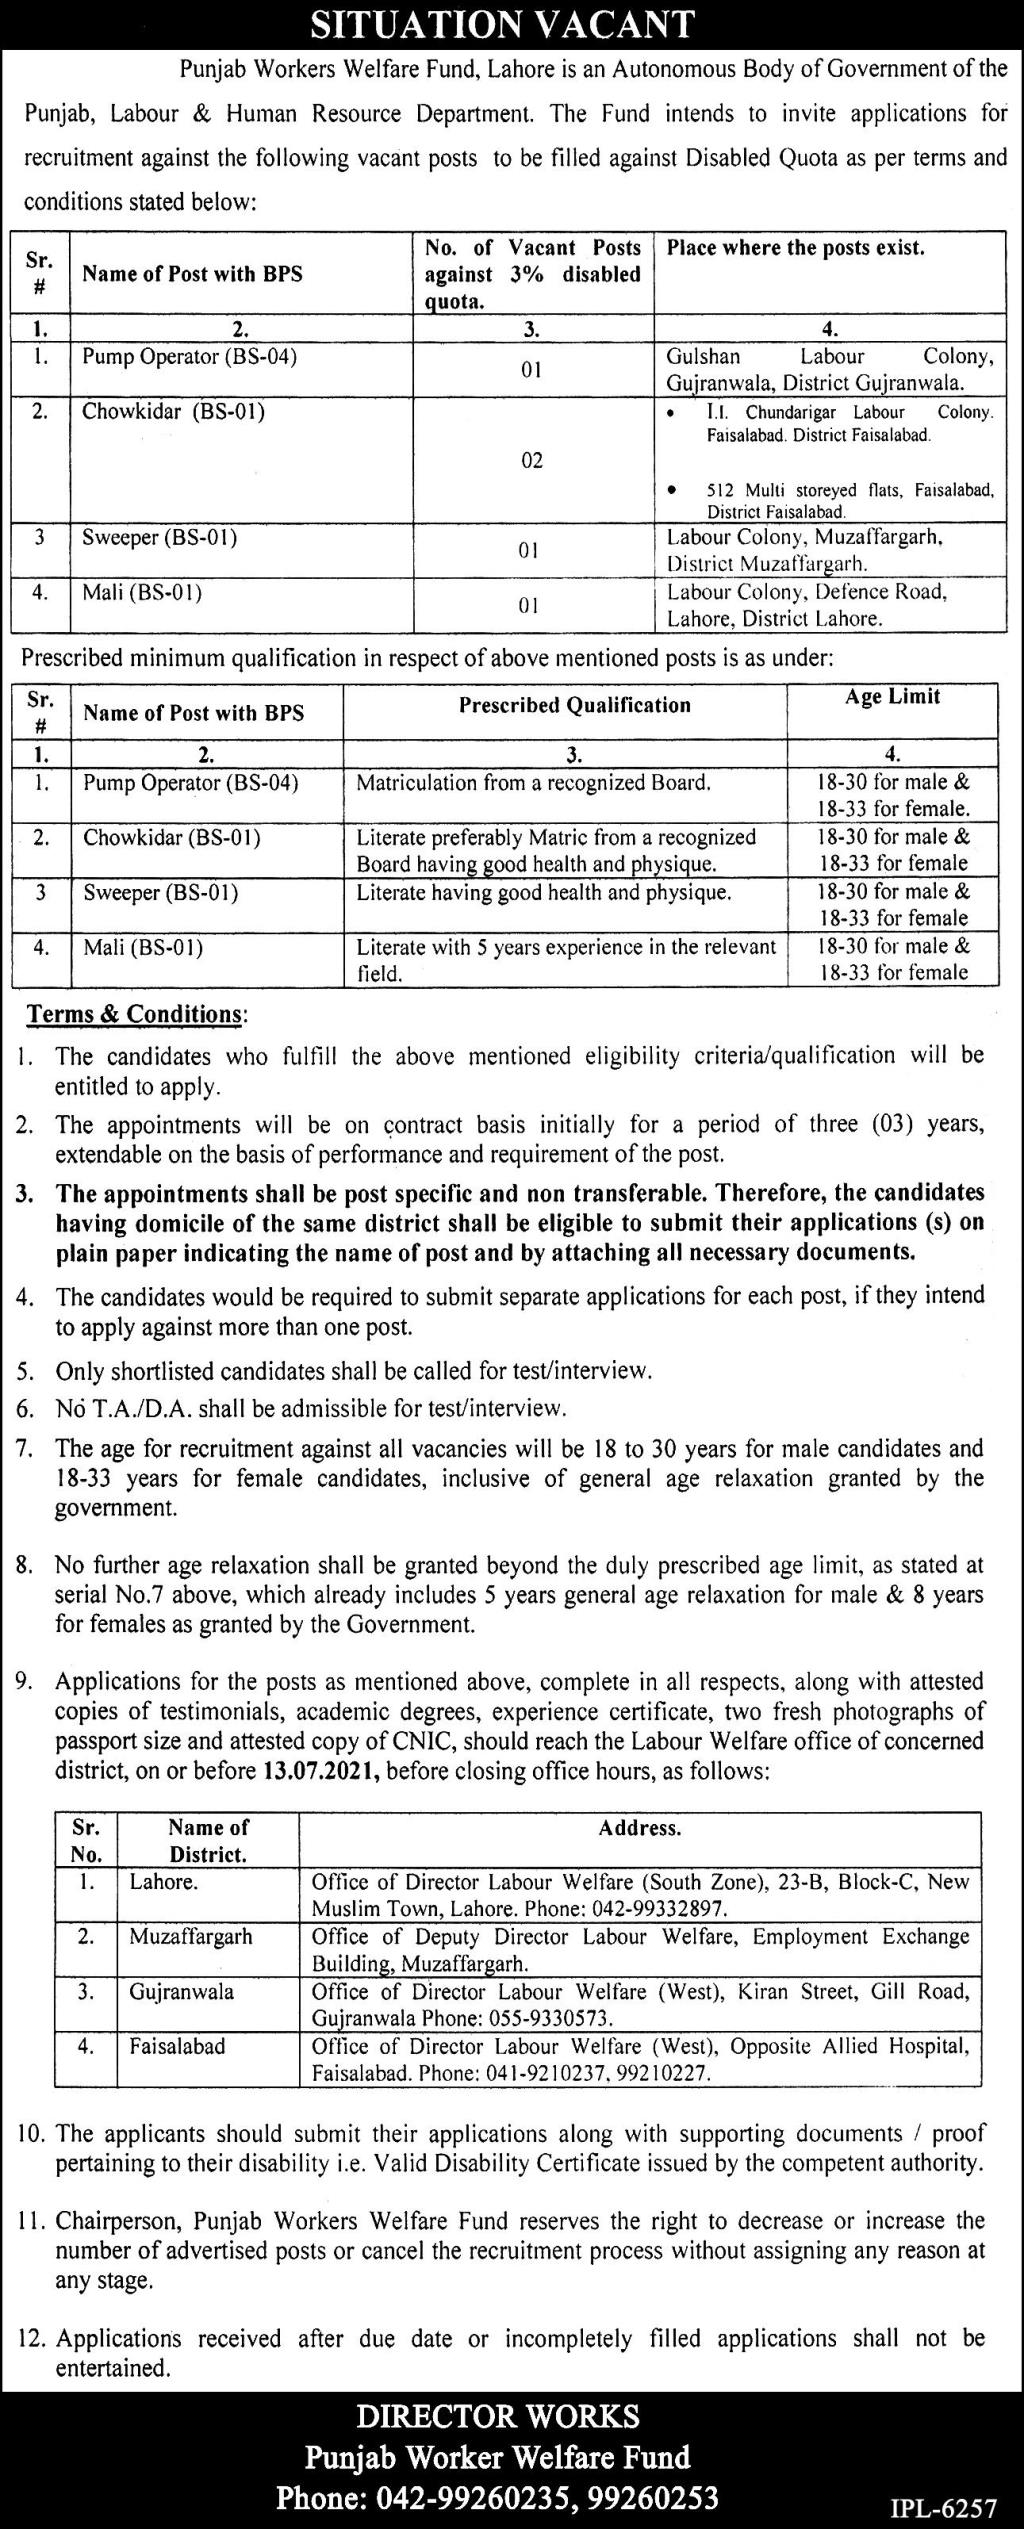 Punjab Workers welfare board Lahore Jobs 26th June 2021 Application Forms